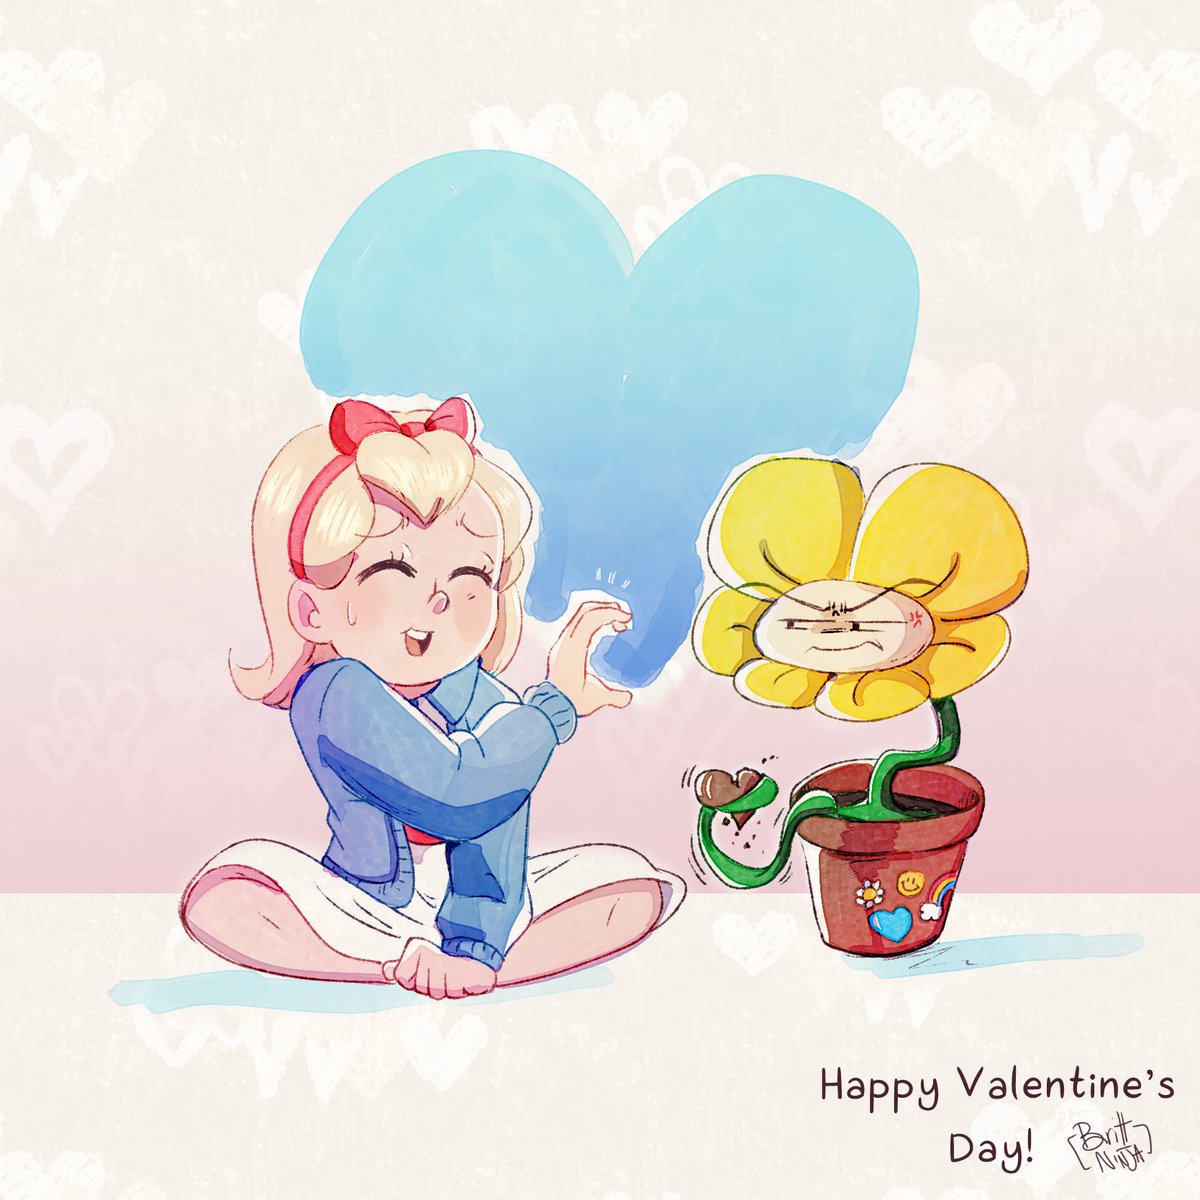 Happy Valentine's Day everyone! Hope you all get to spend it with Your Best Friend :]

#undertale #floweytheflower #undertaleAU